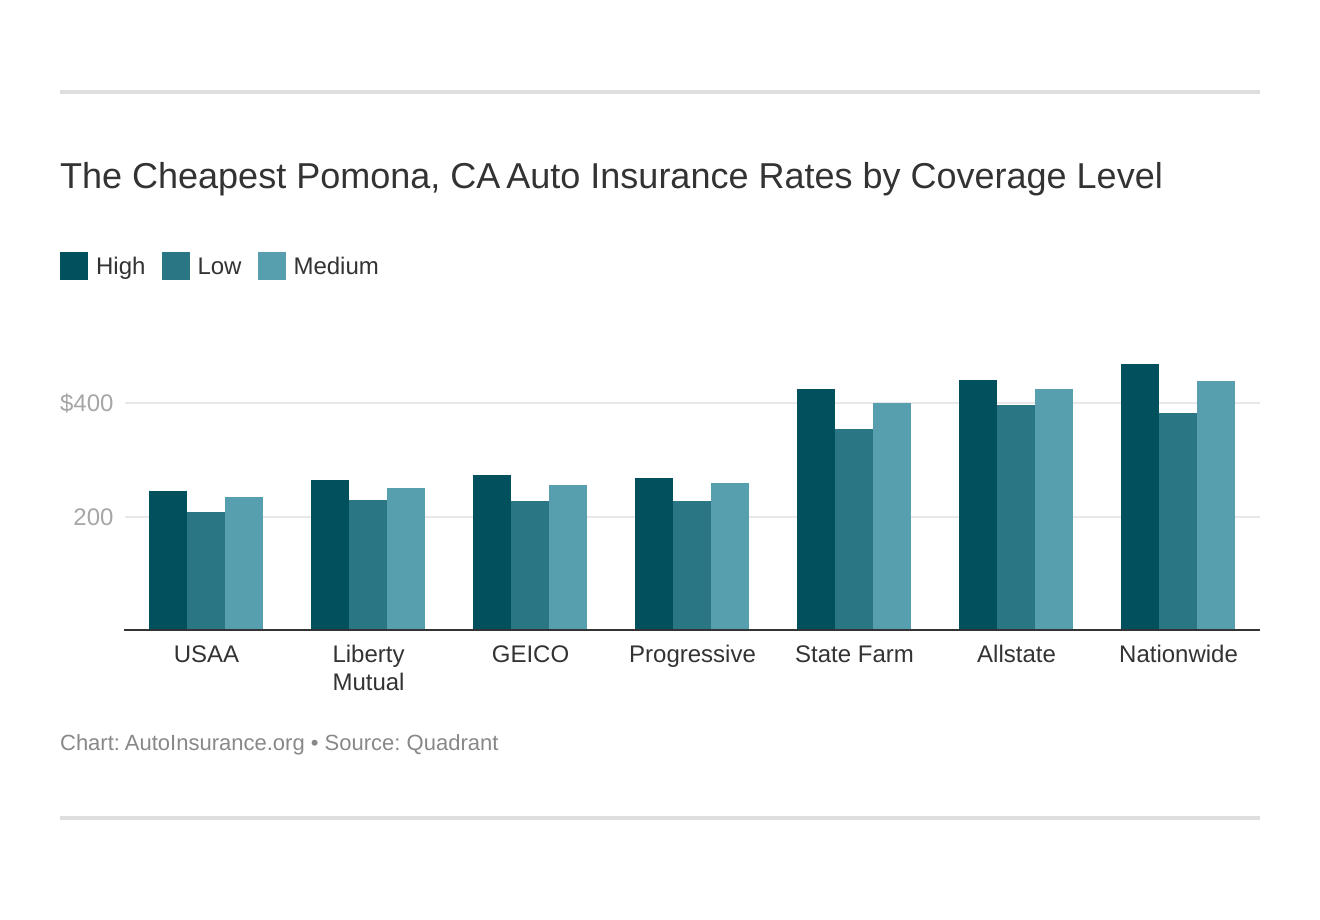 The Cheapest Pomona, CA Auto Insurance Rates by Coverage Level